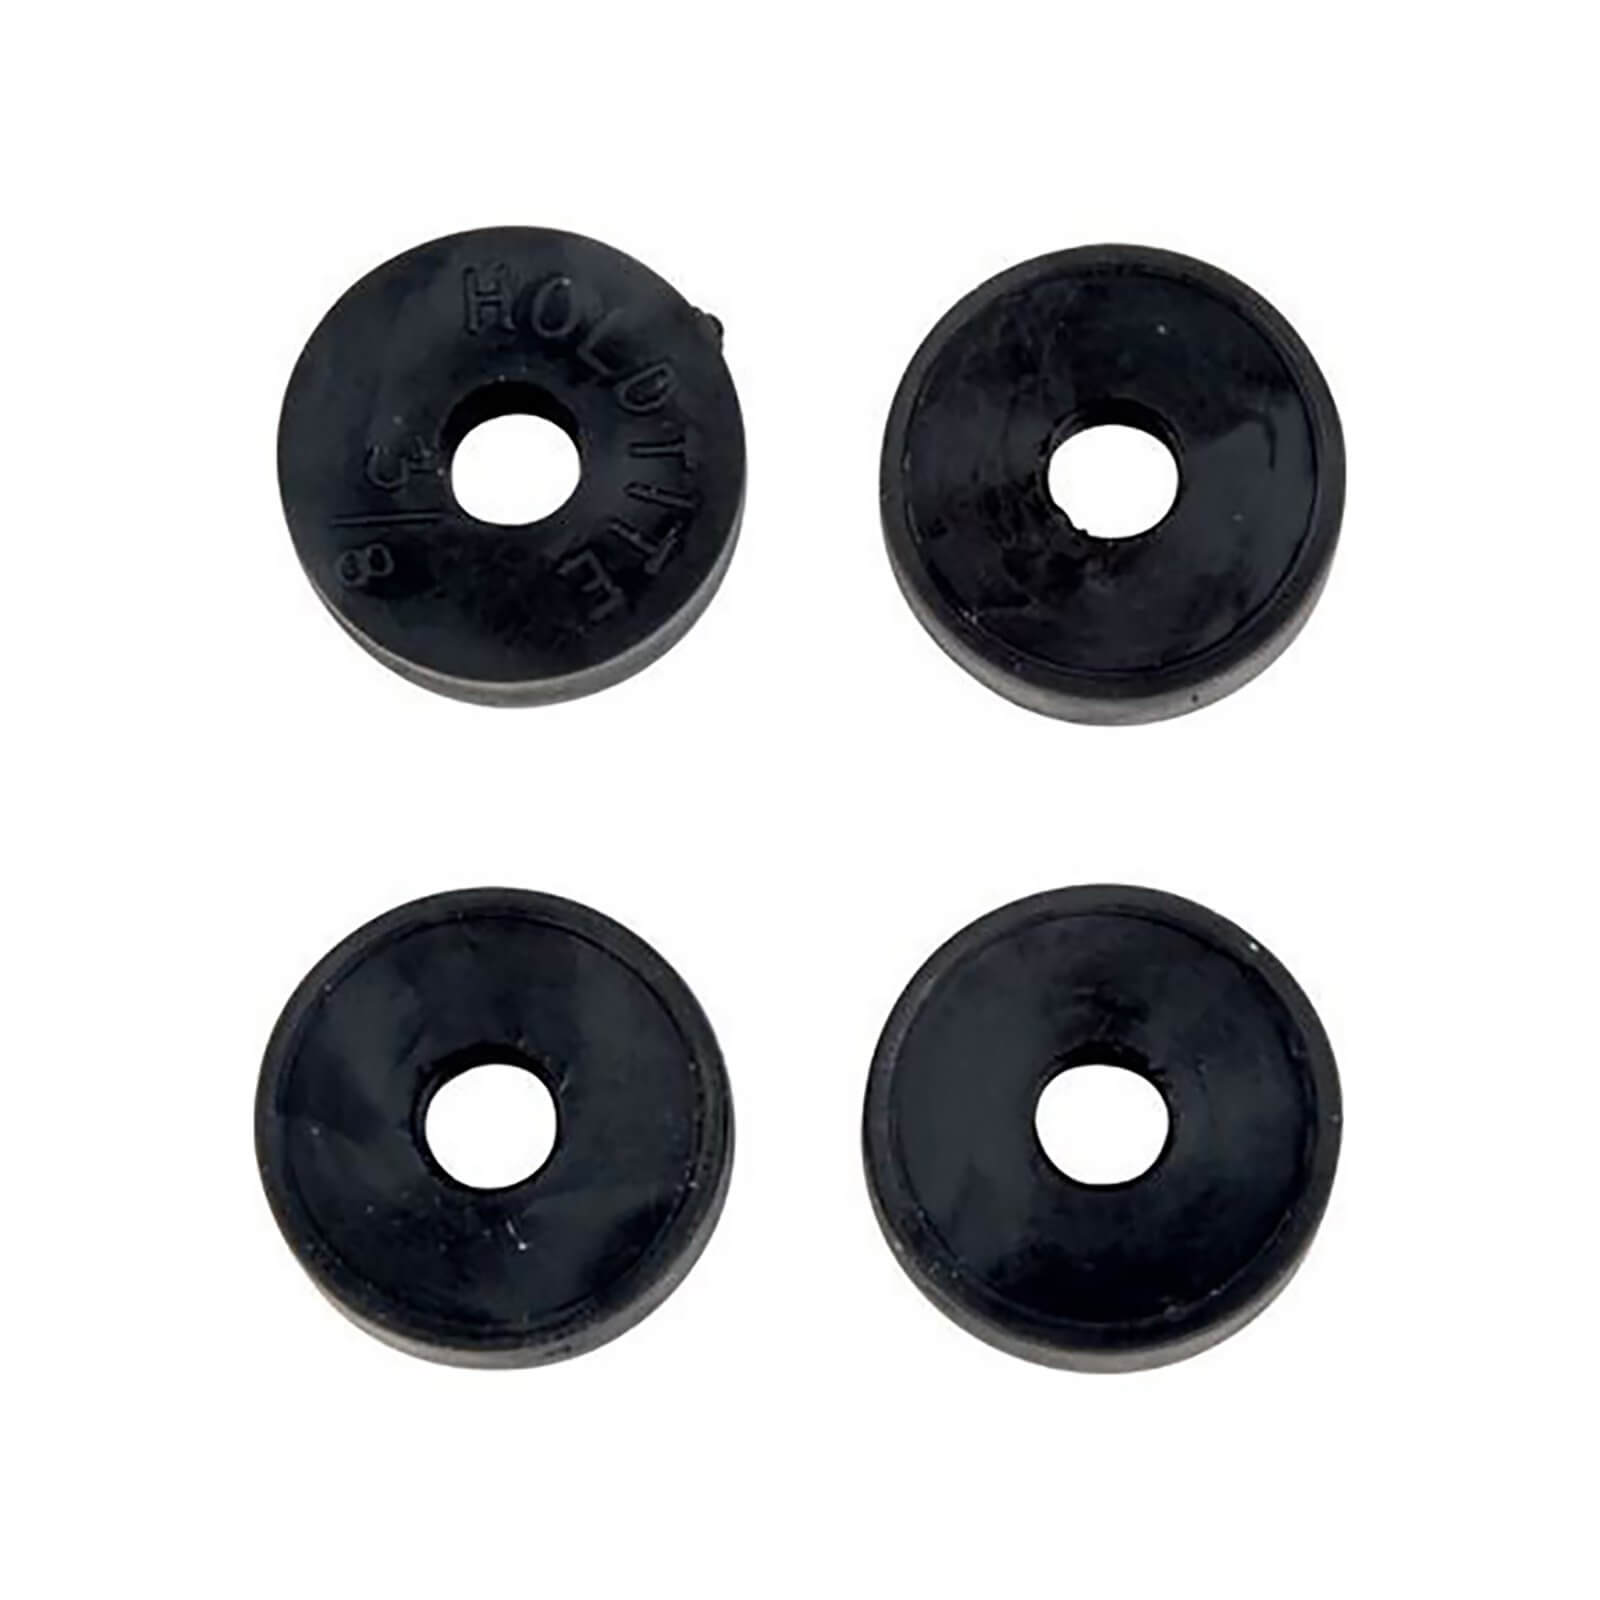 Flat Tap Washers - 10mm - 4 Pack